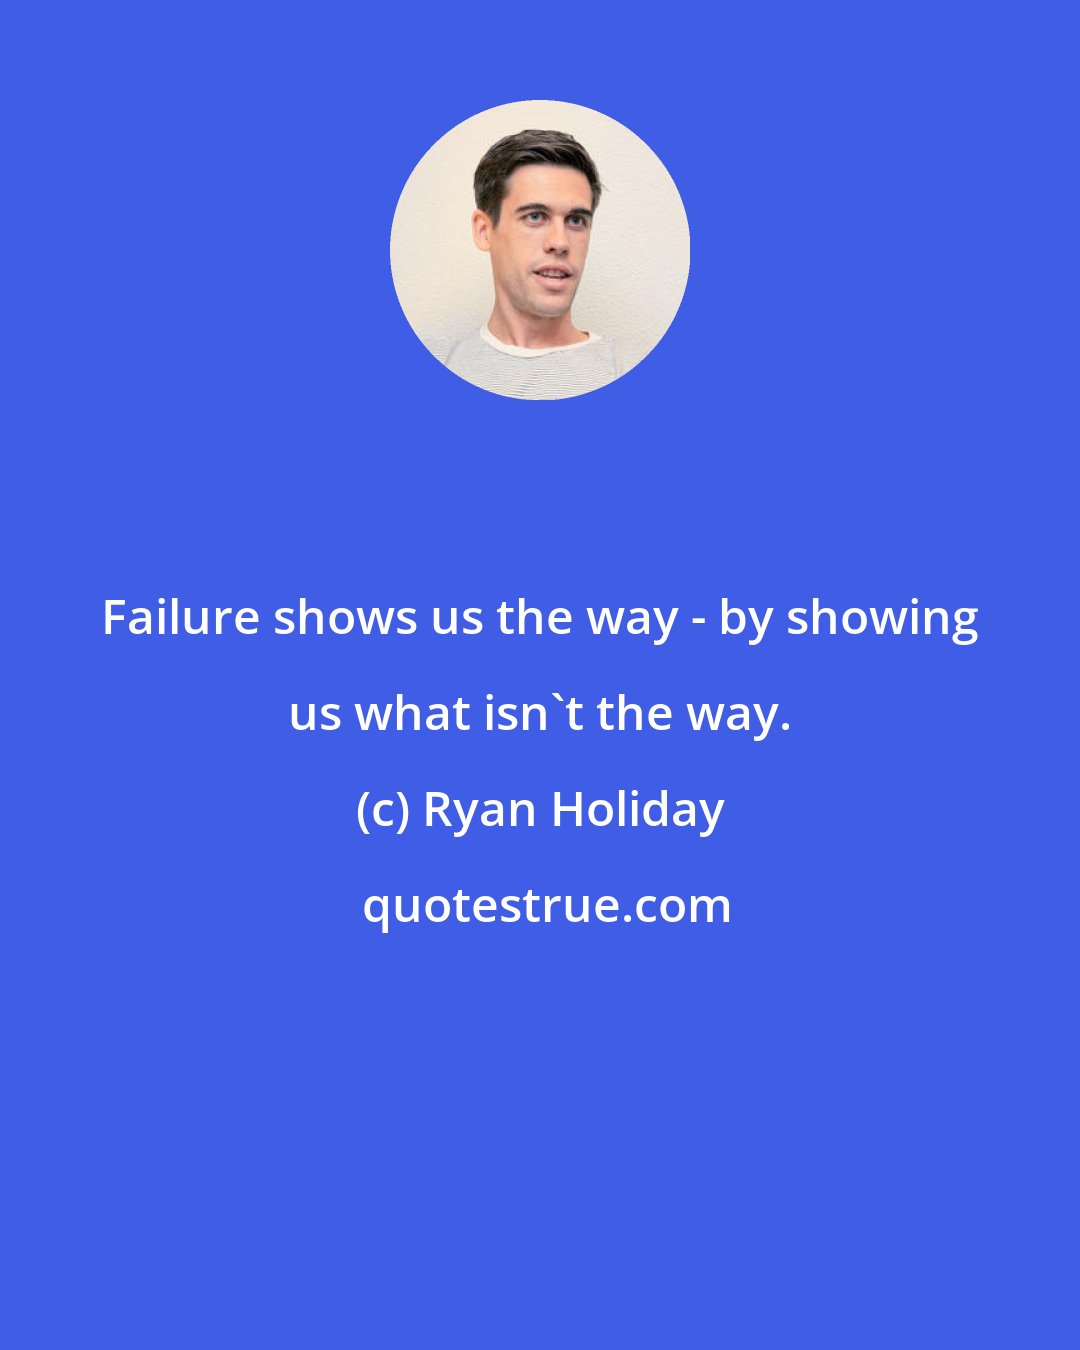 Ryan Holiday: Failure shows us the way - by showing us what isn't the way.